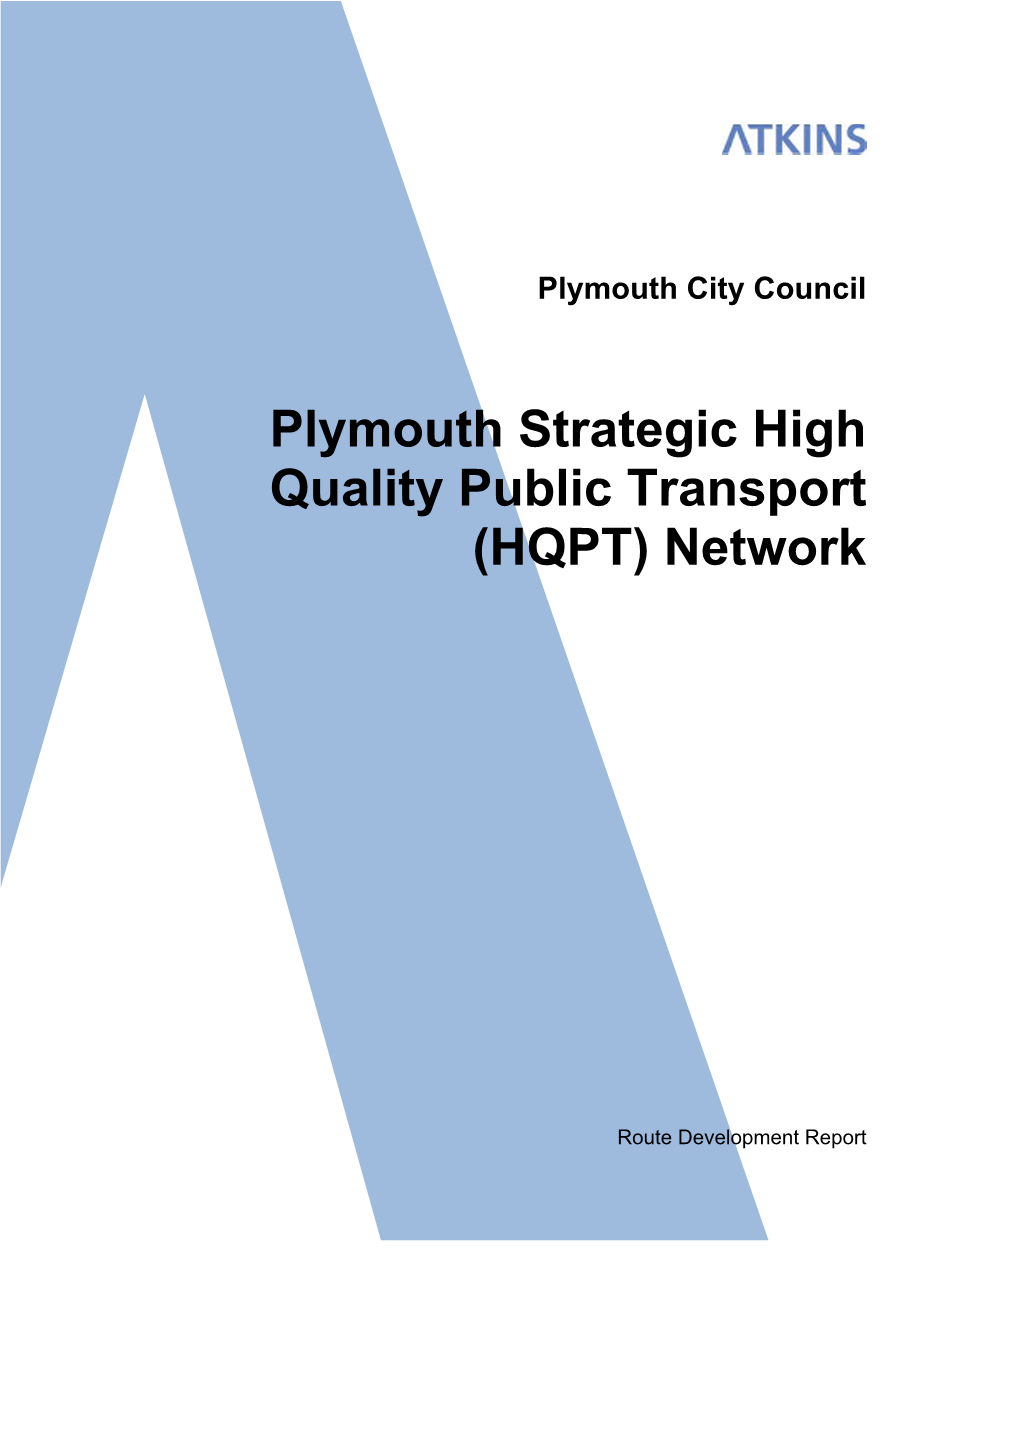 Plymouth Strategic High Quality Public Transport (HQPT) Network